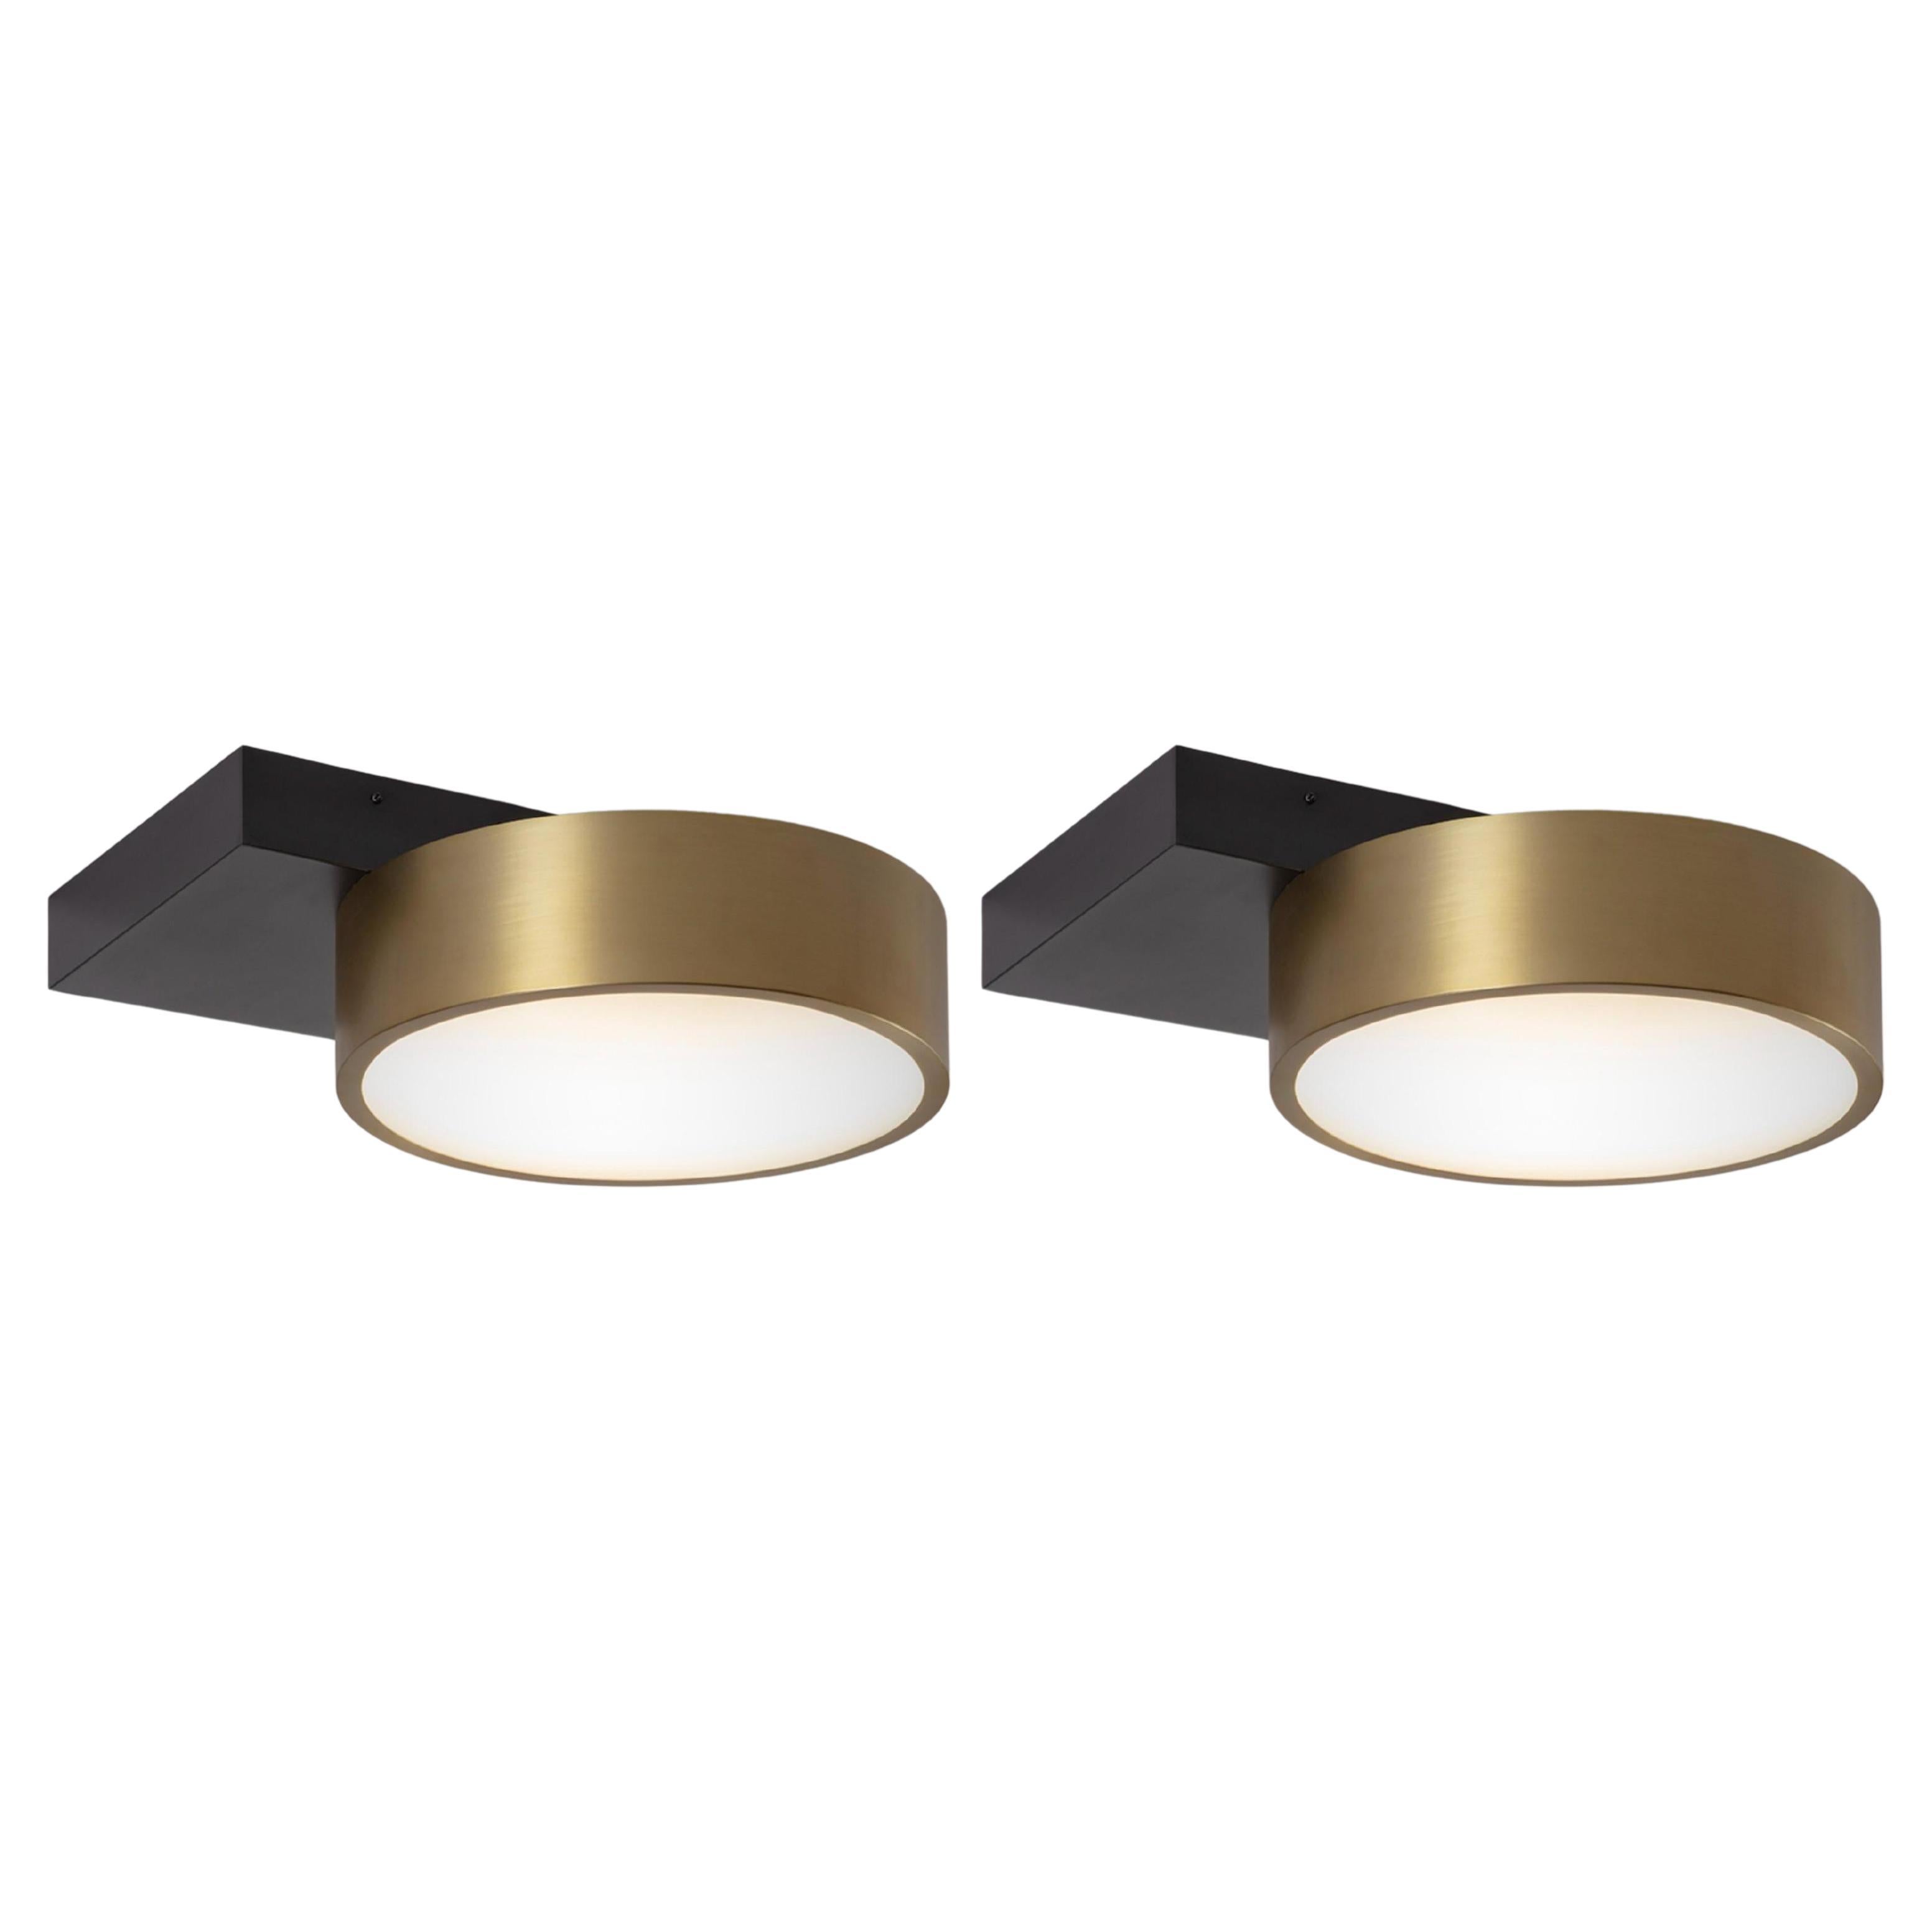 Set of 2 Square in Circle Ceiling Lights by Square in Circle For Sale